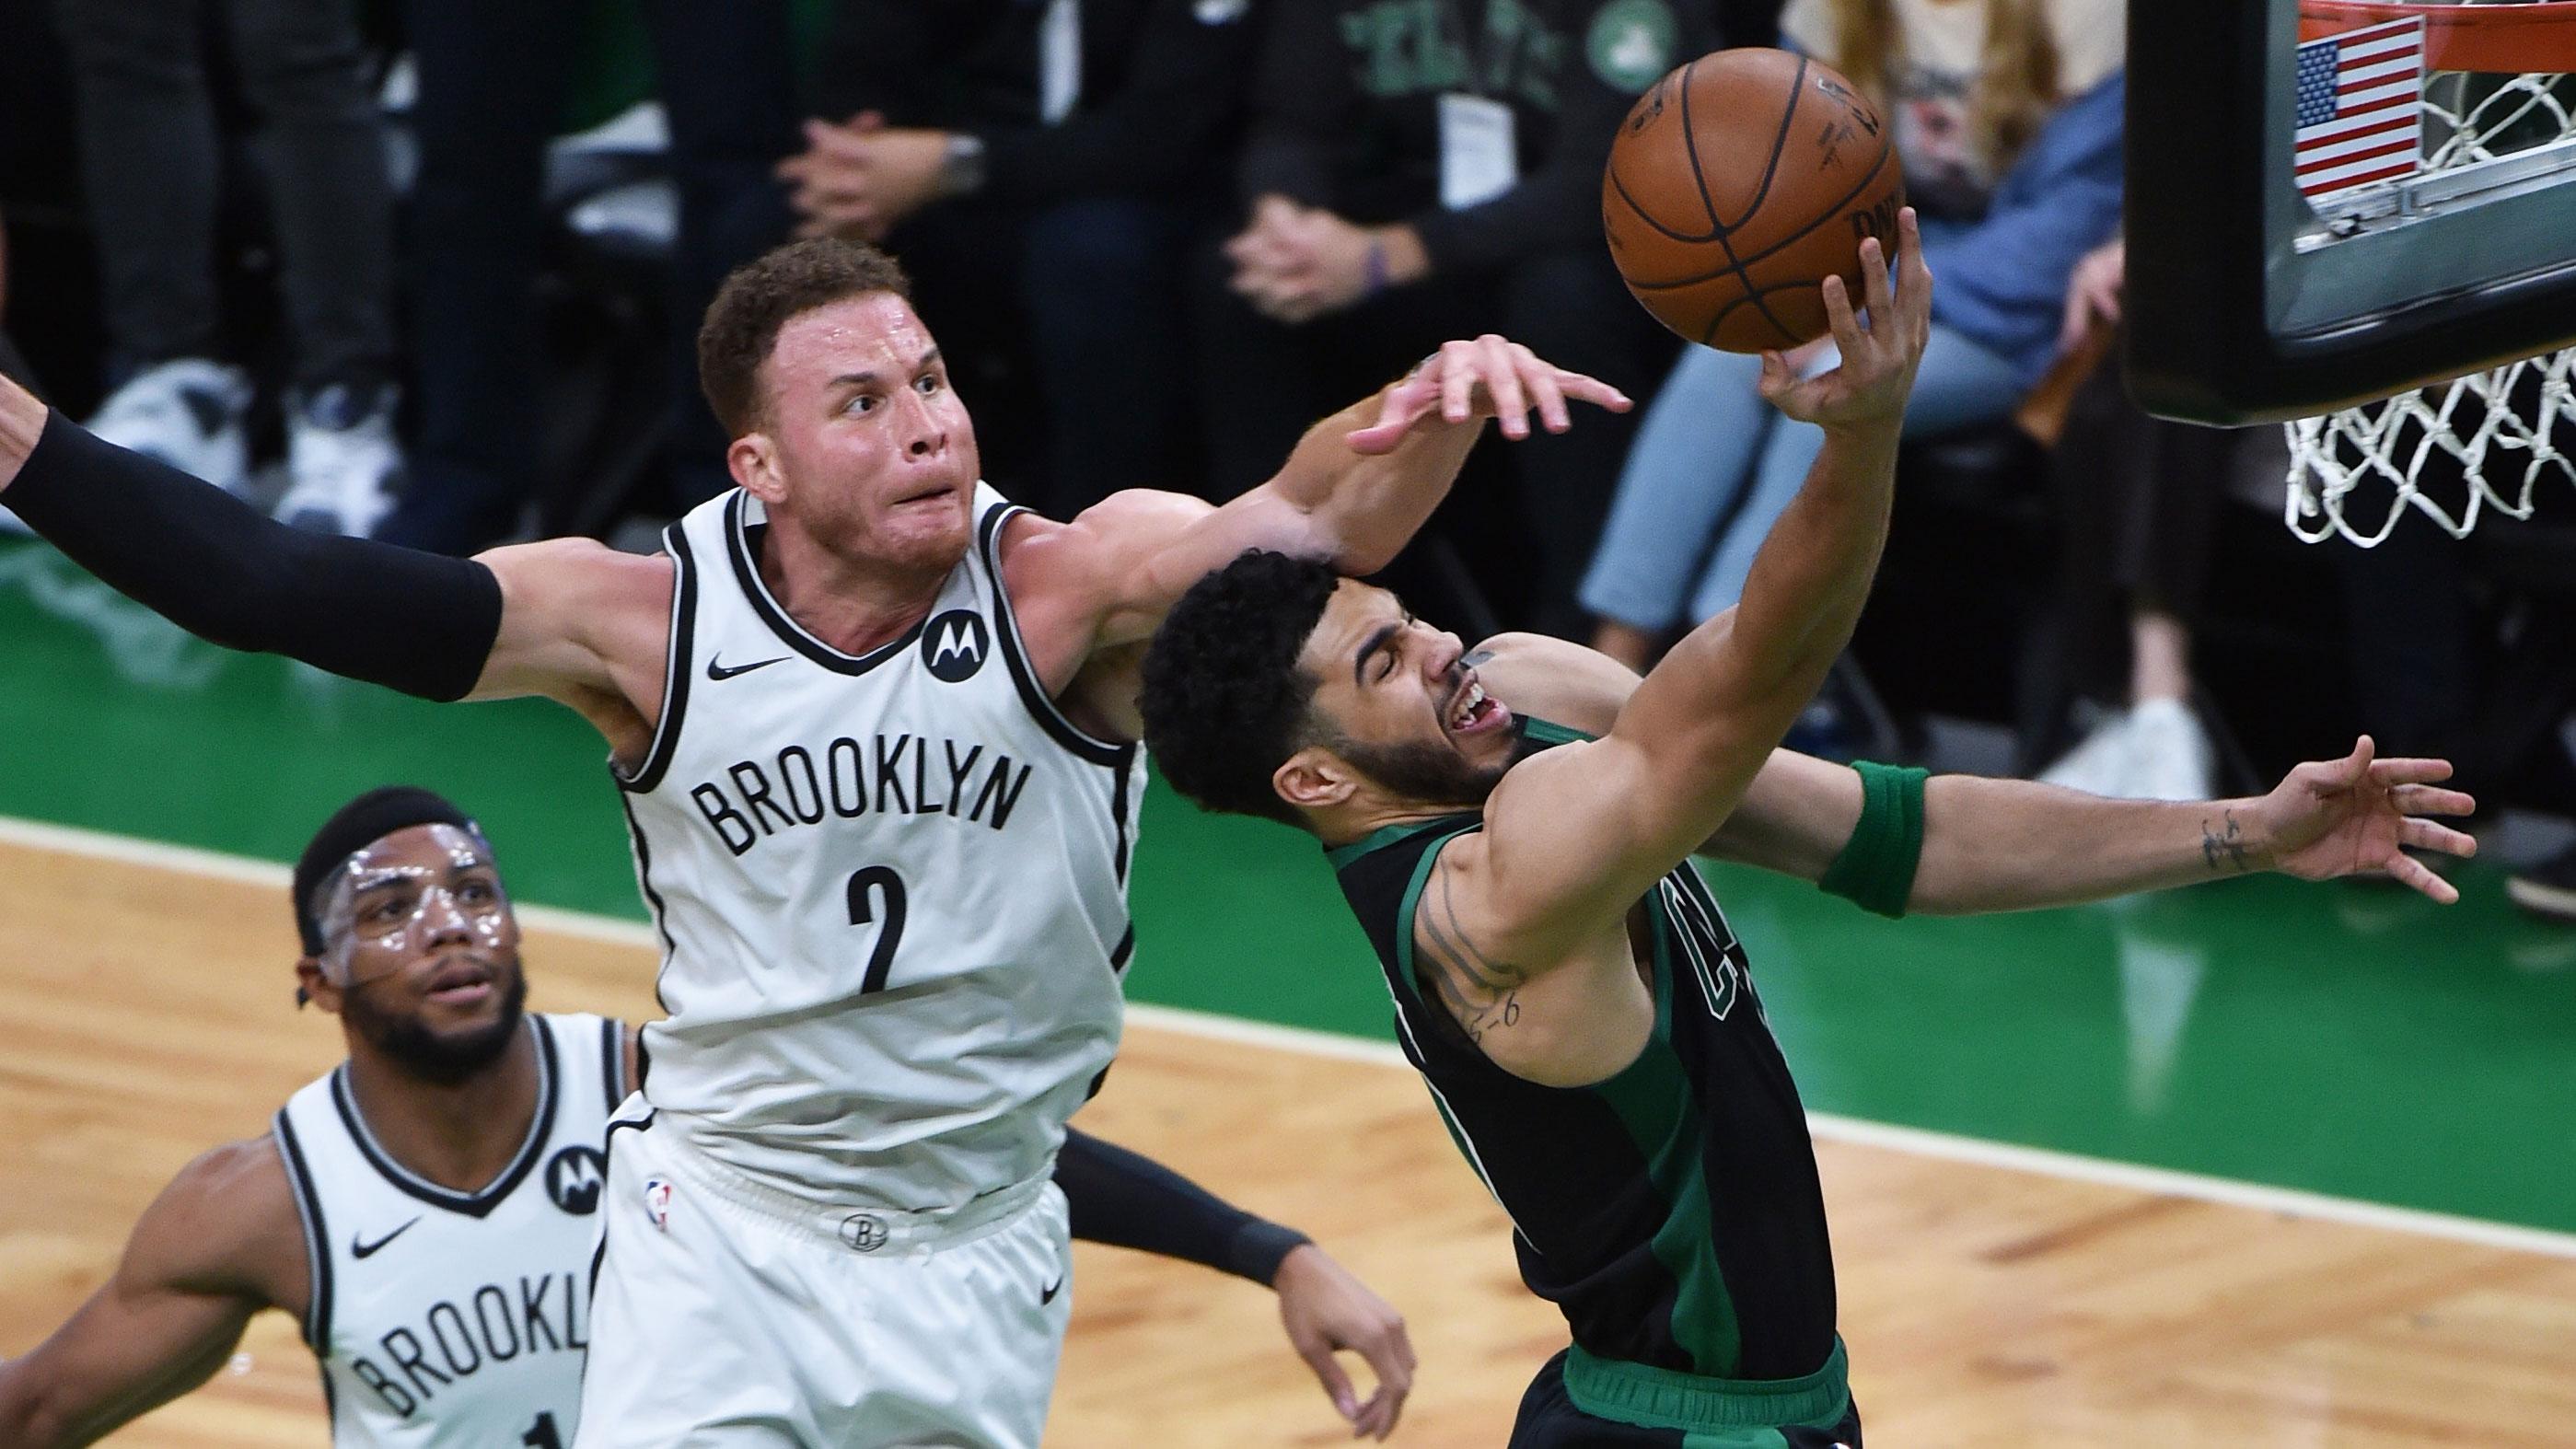 May 28, 2021; Boston, Massachusetts, USA; Boston Celtics forward Jayson Tatum (0) drives to the basket past Brooklyn Nets forward Blake Griffin (2) during the first half during game three in the first round of the 2021 NBA Playoffs at TD Garden. / Bob DeChiara-USA TODAY Sports